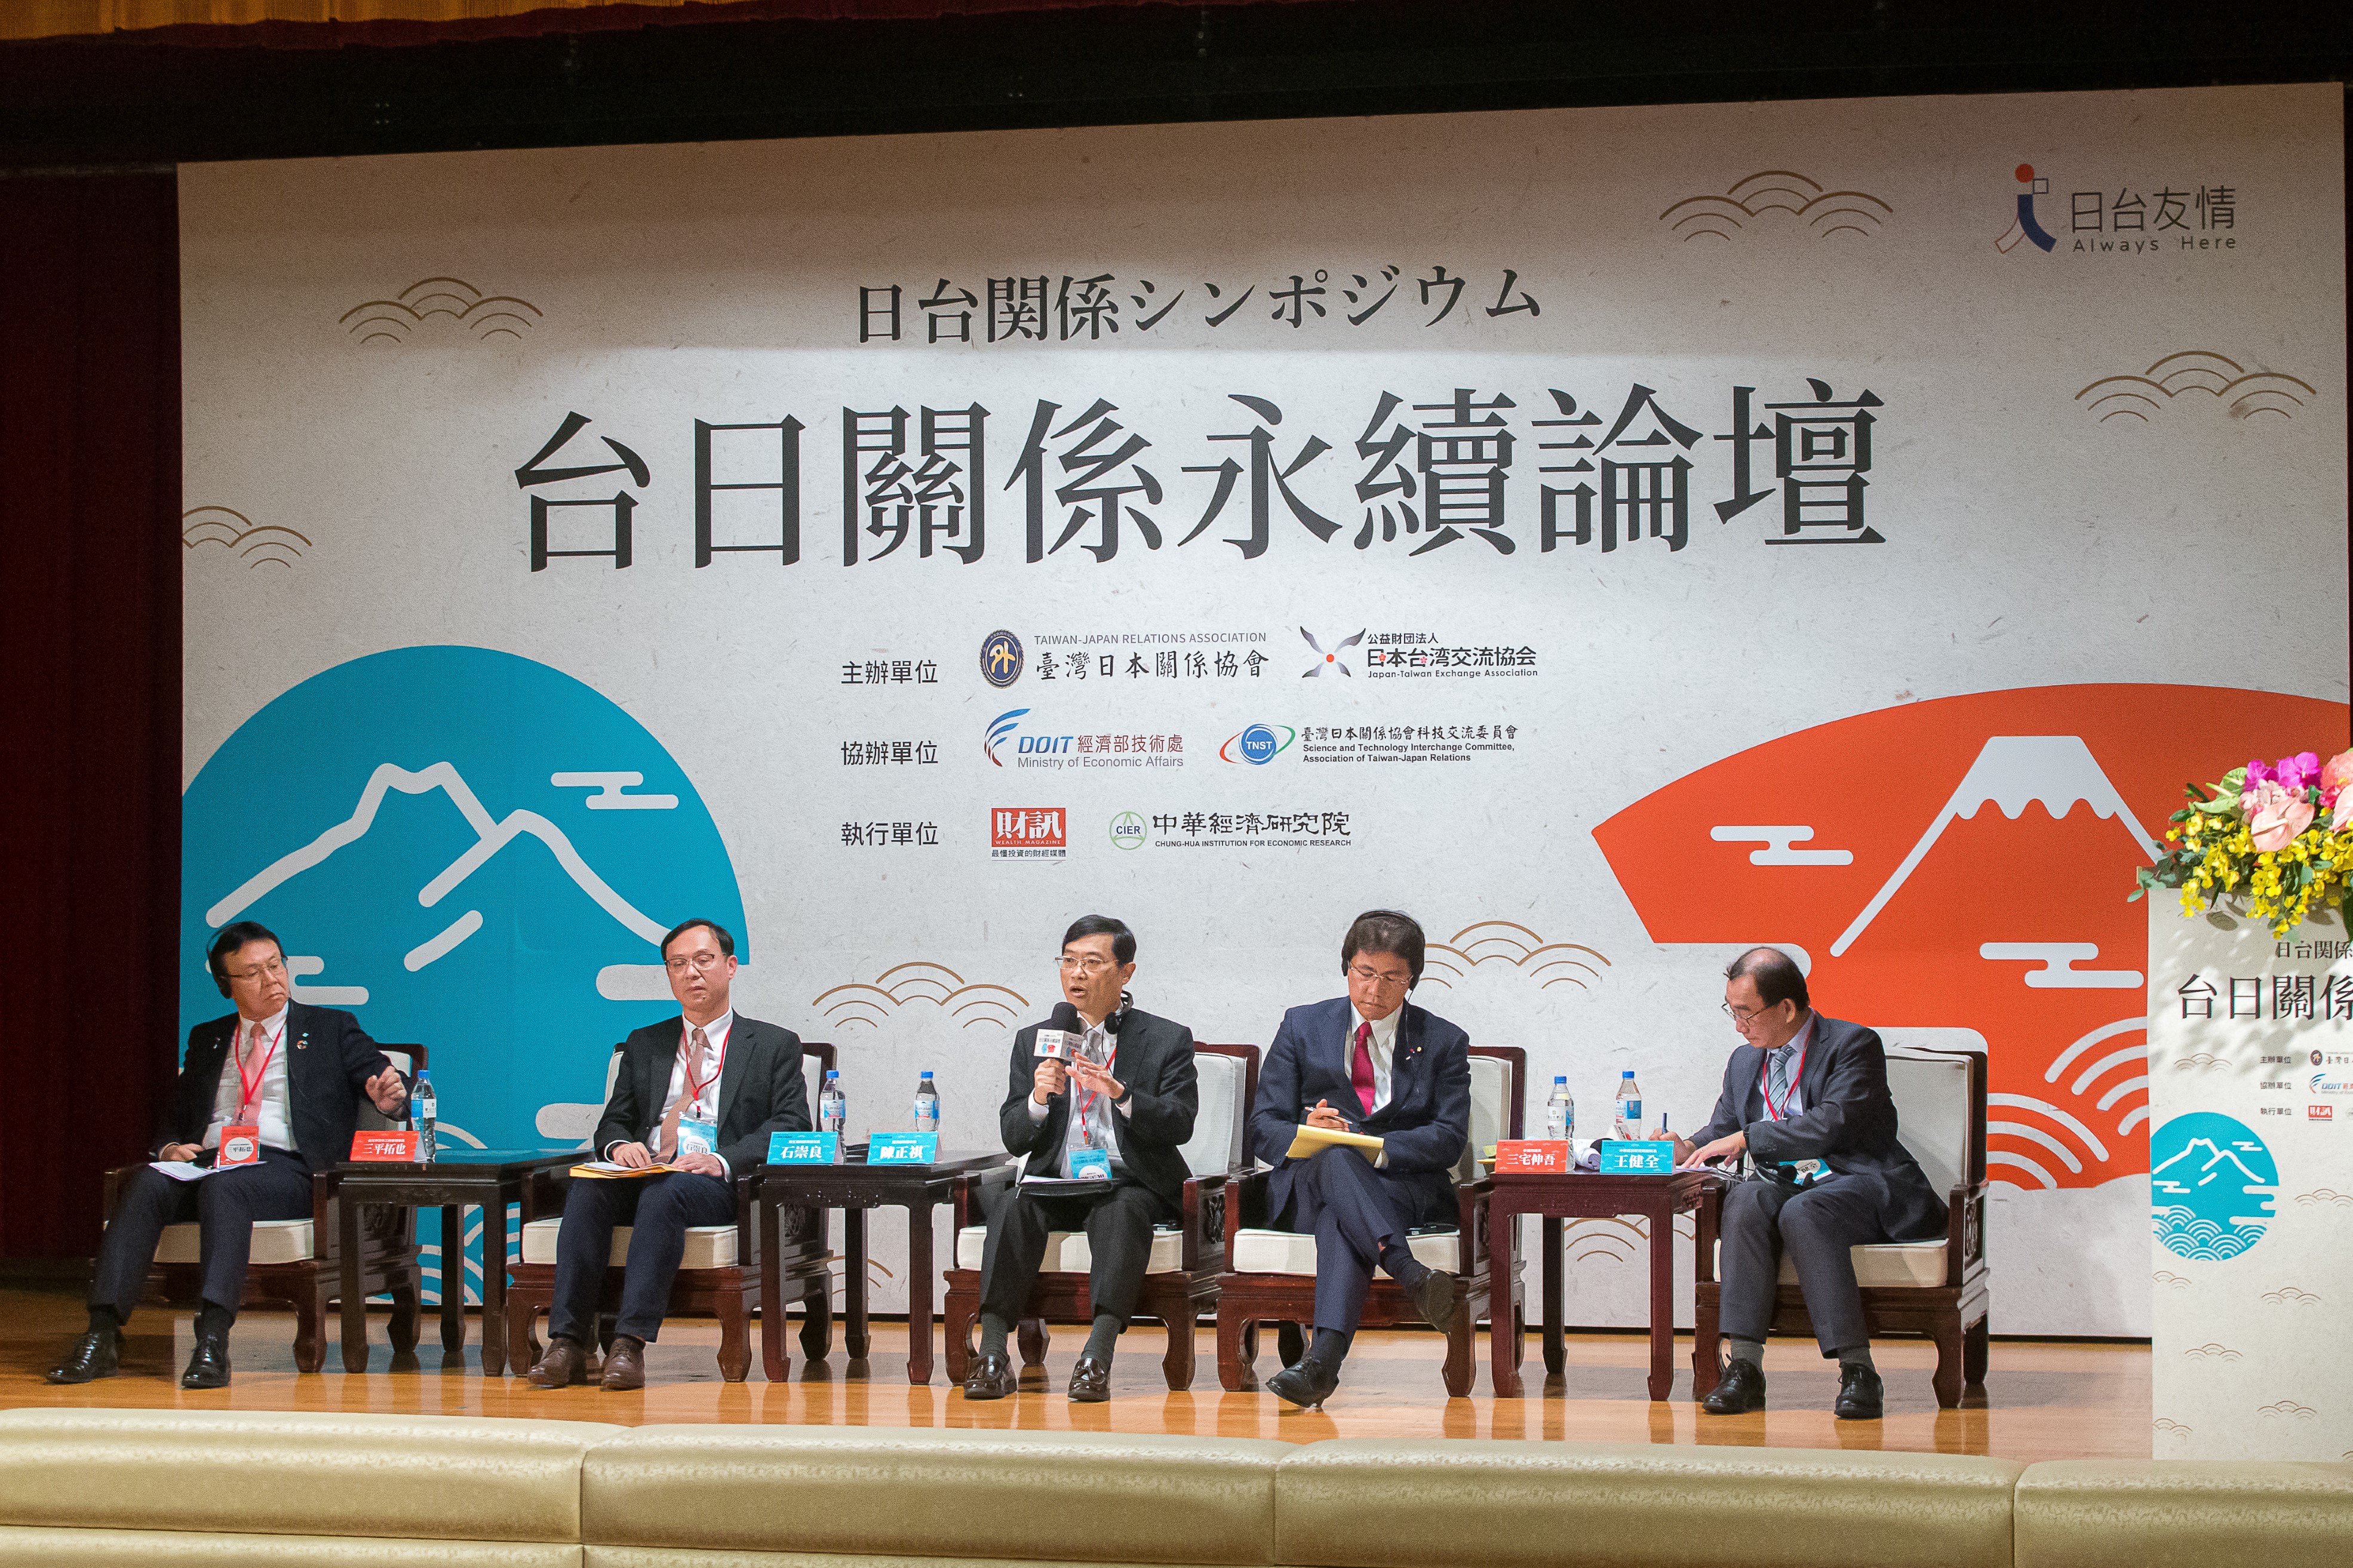 Deputy Minister Chen Attends the 2022 Taiwan-Japan Relations Symposium as one of the panelists